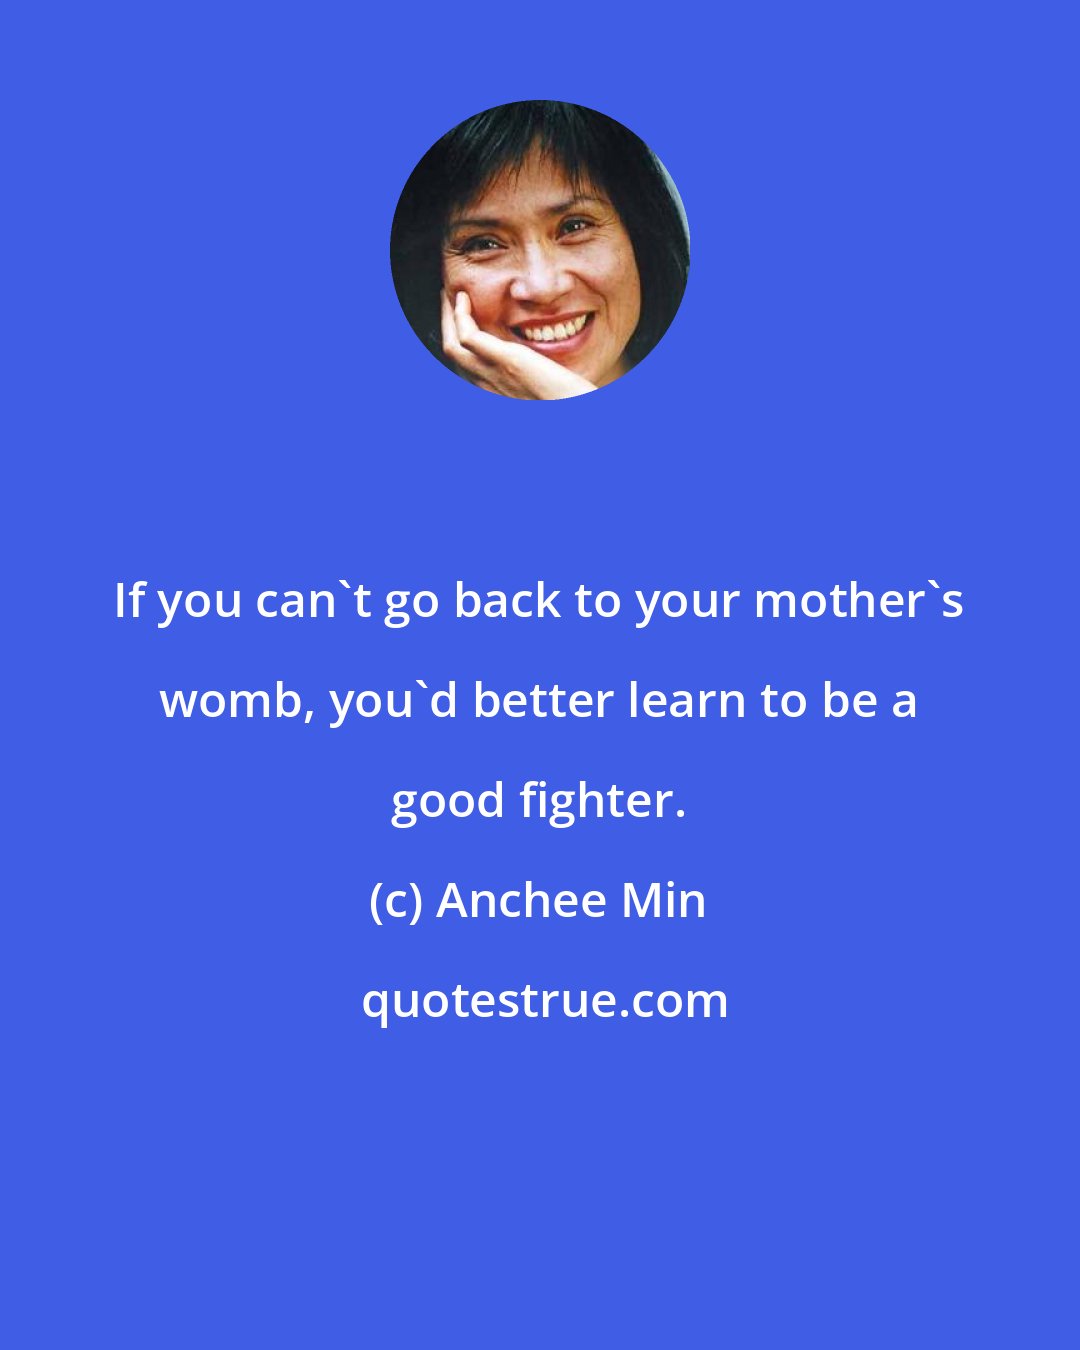 Anchee Min: If you can't go back to your mother's womb, you'd better learn to be a good fighter.